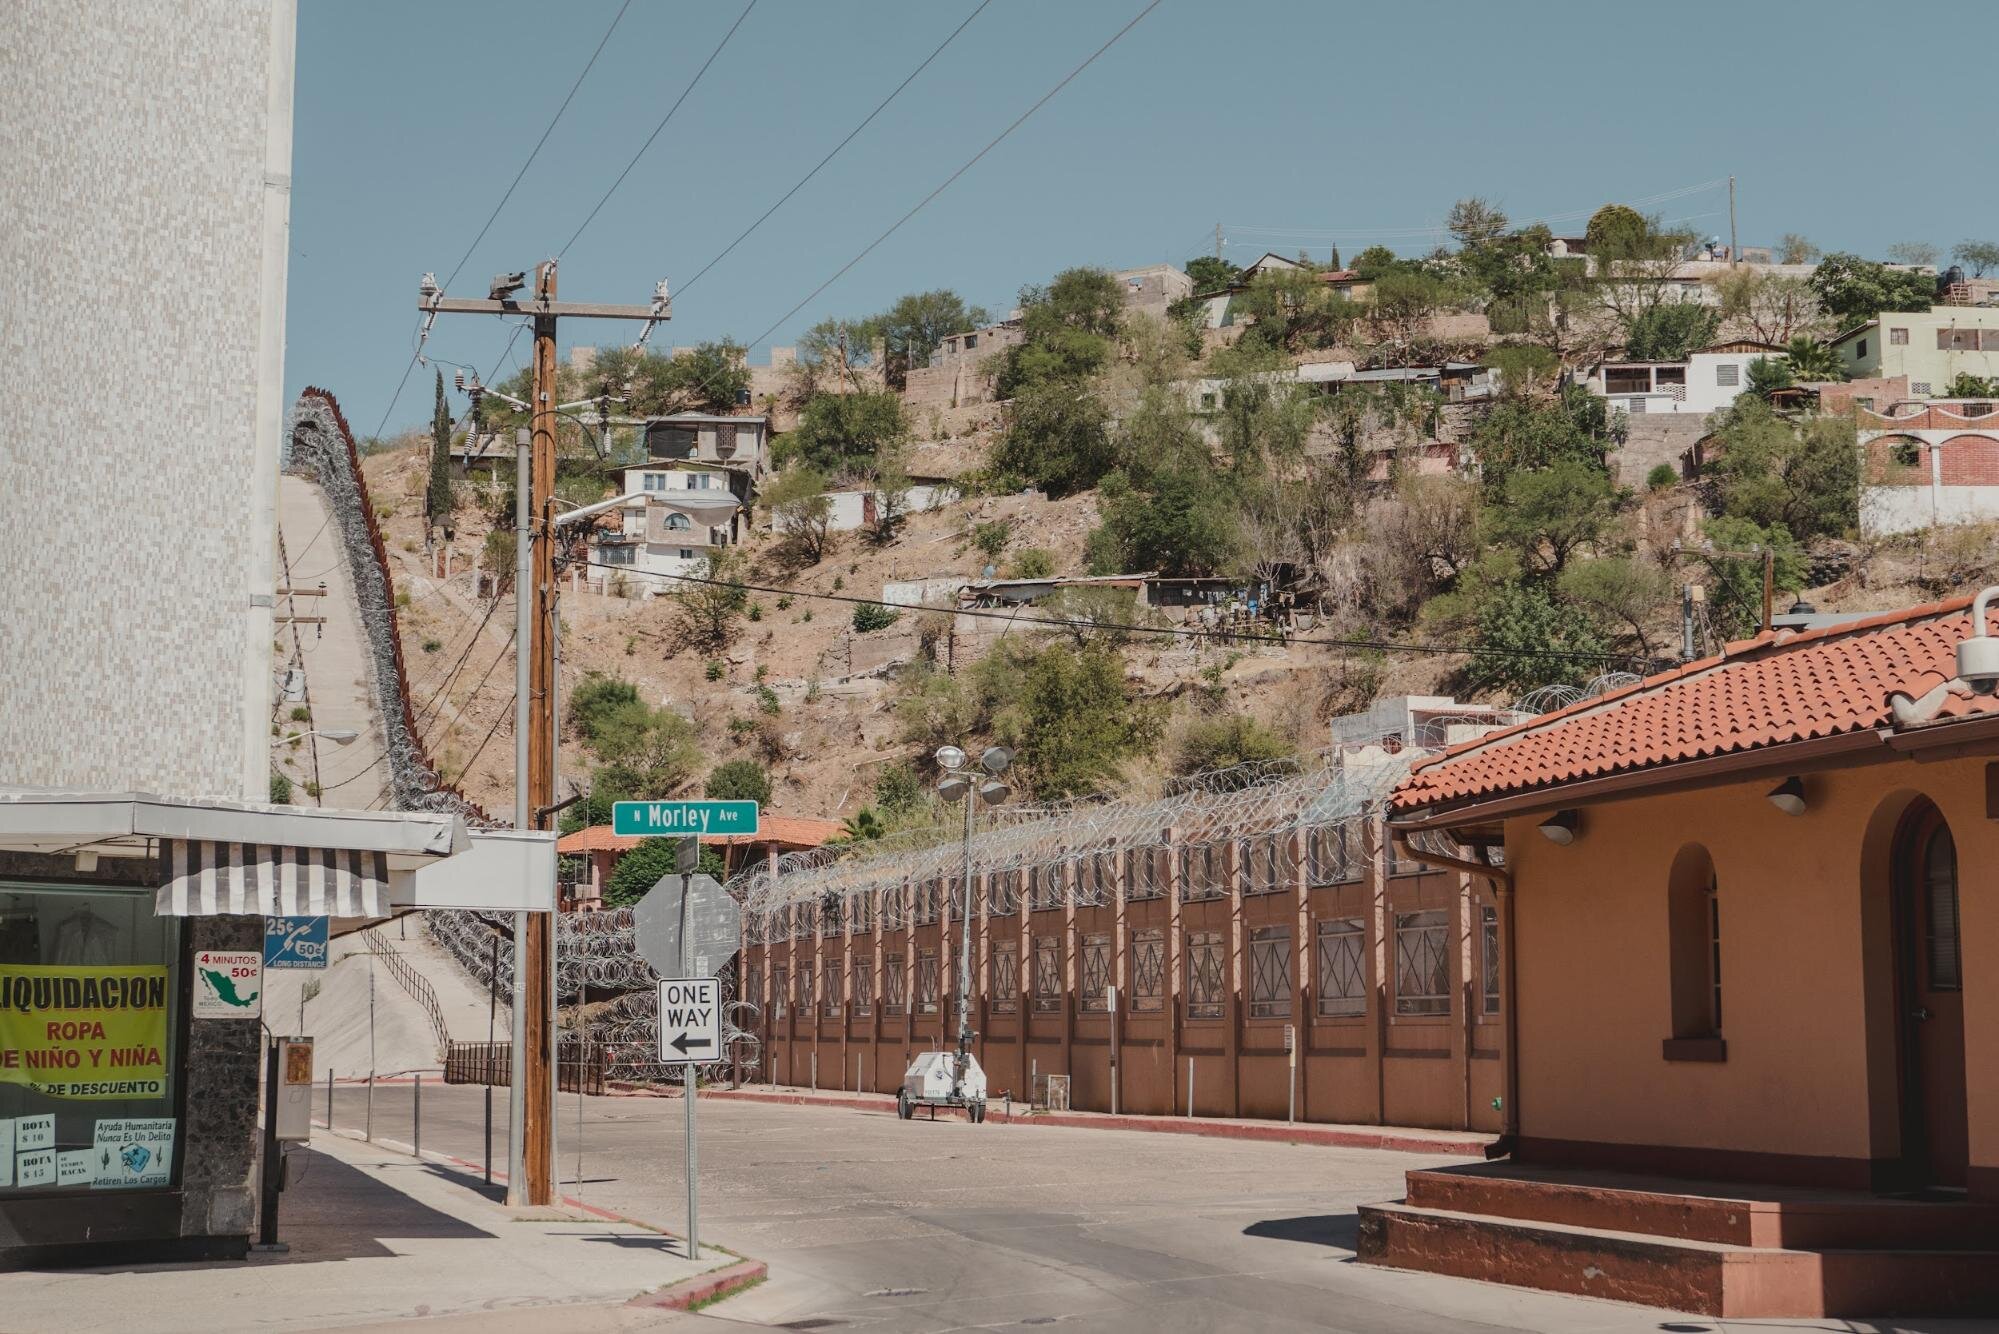   The border wall as seen from the Morley pedestrian port of entry in downtown Nogales, Arizona.To the right is Nogales, Sonora. Photo by Martiza L. Félix  